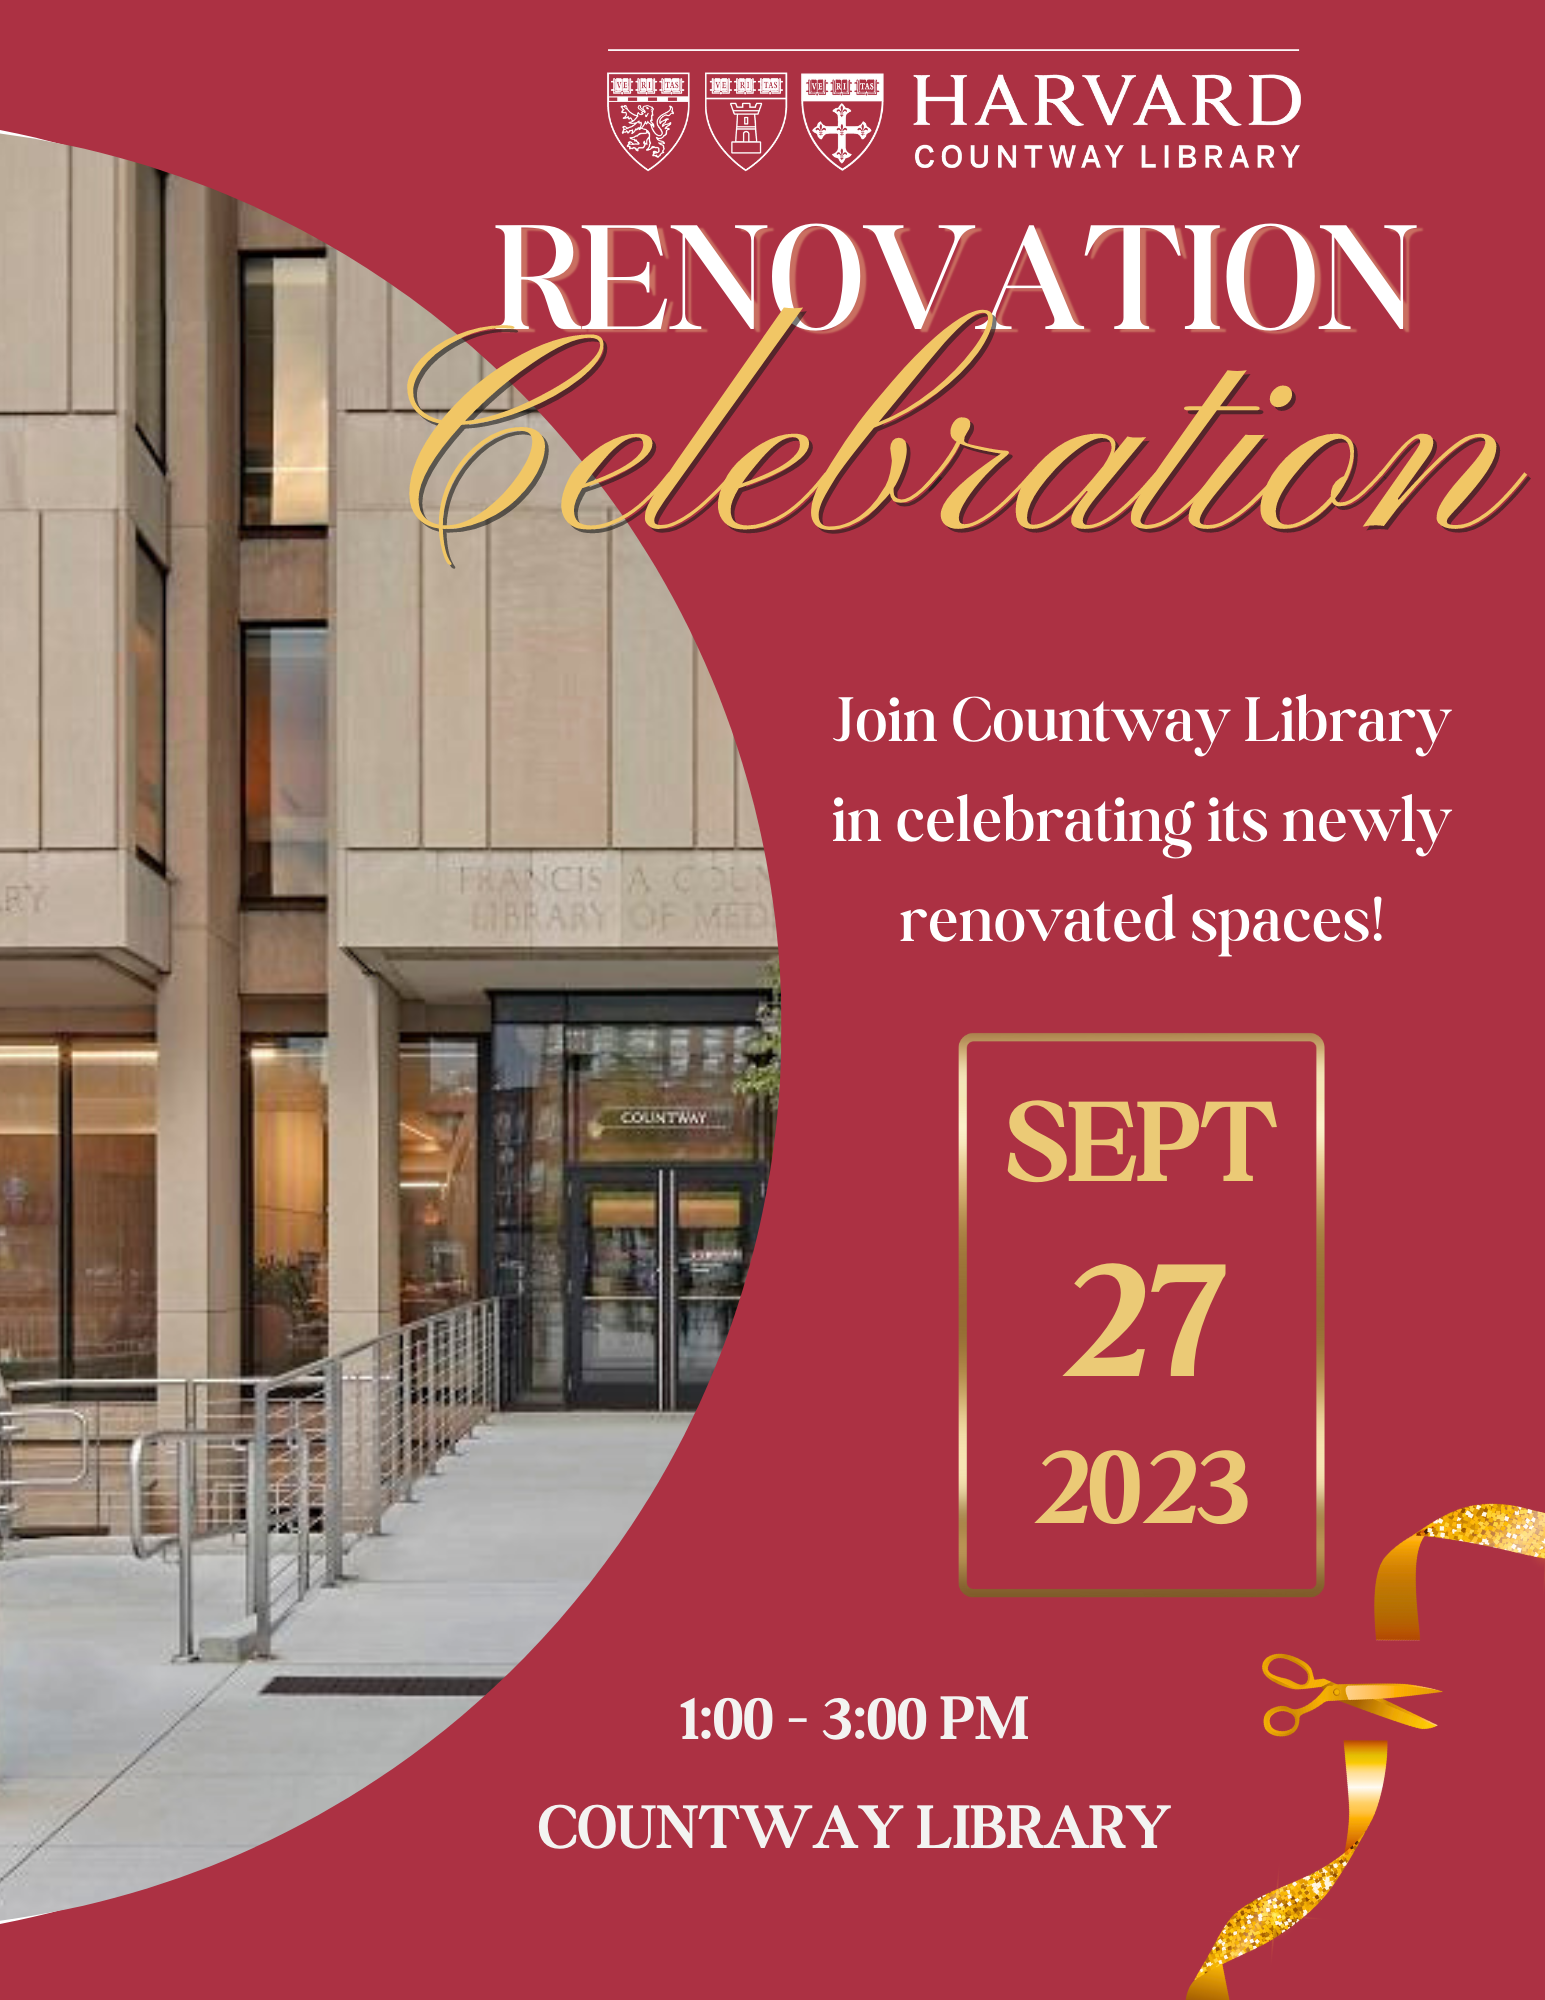 Harvard Countway Library Renovation Celebration. Join Countway Library in celebrating its newly renovated spaces on September 27, 2023 from 1:00 PM to 3:00 PM at Countway Library.